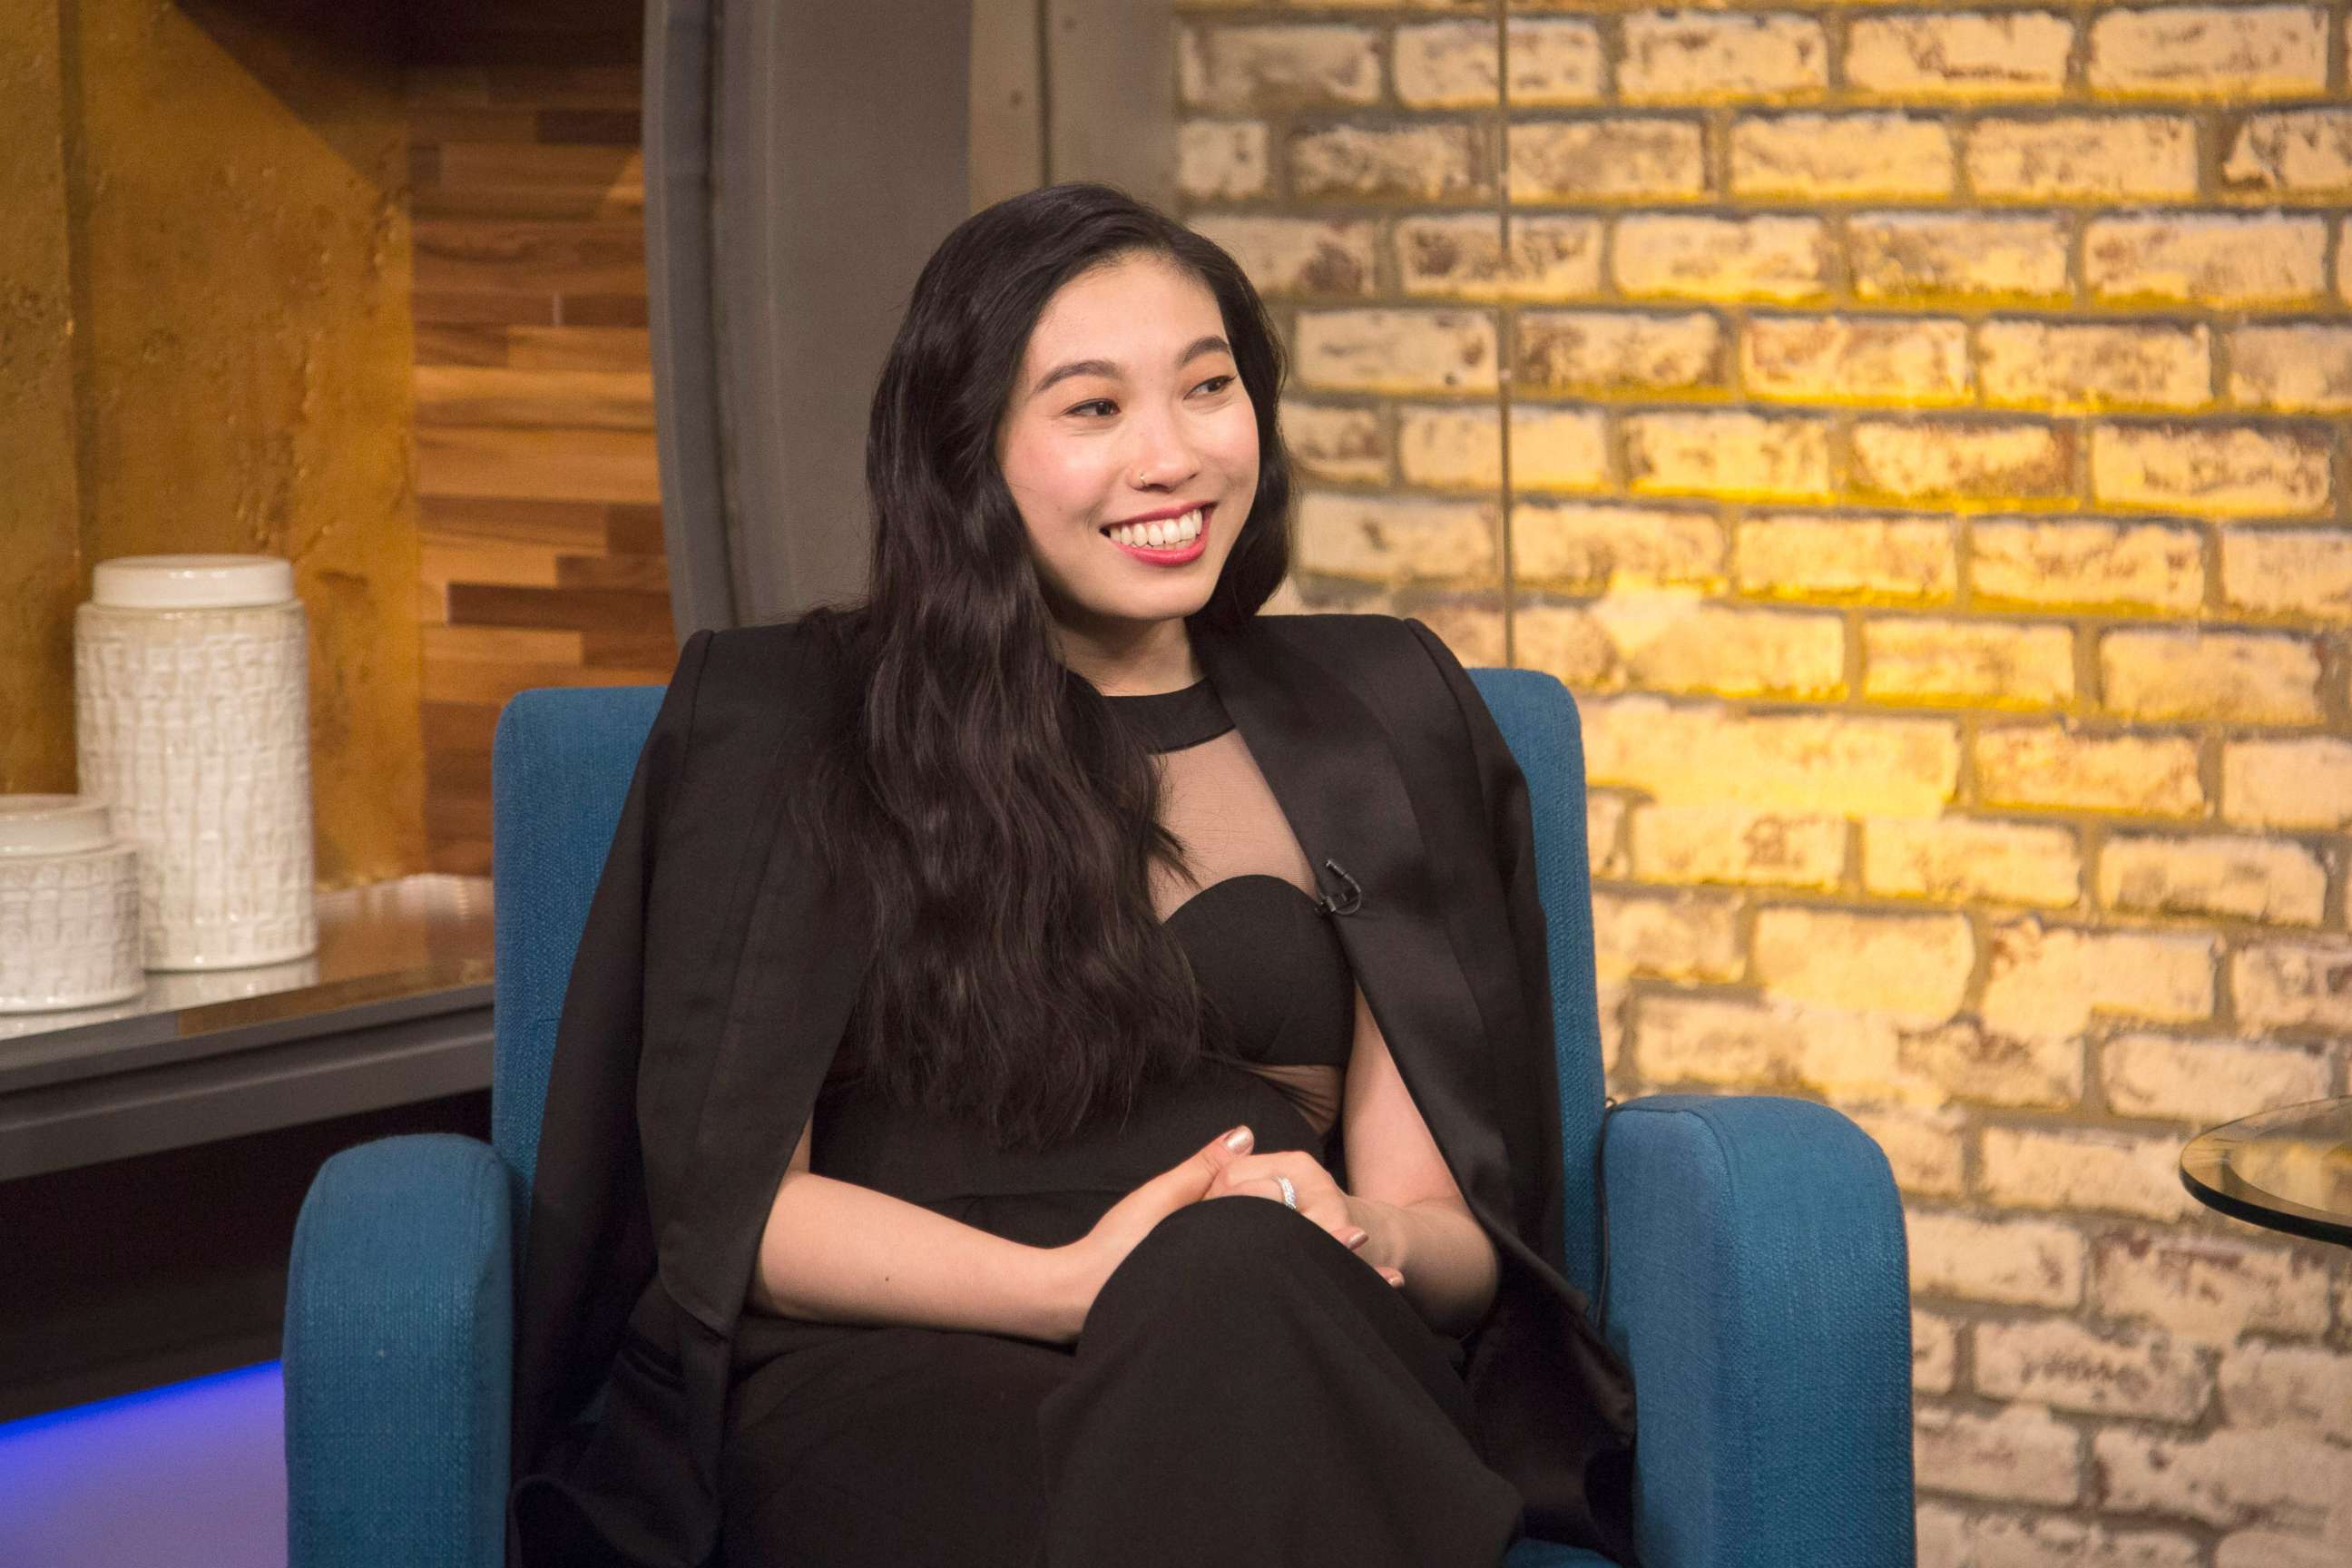 PHOTO: Awkwafinan appears on "Popcorn with Peter Travers" at ABC News studios, June 5, 2018, in New York City.